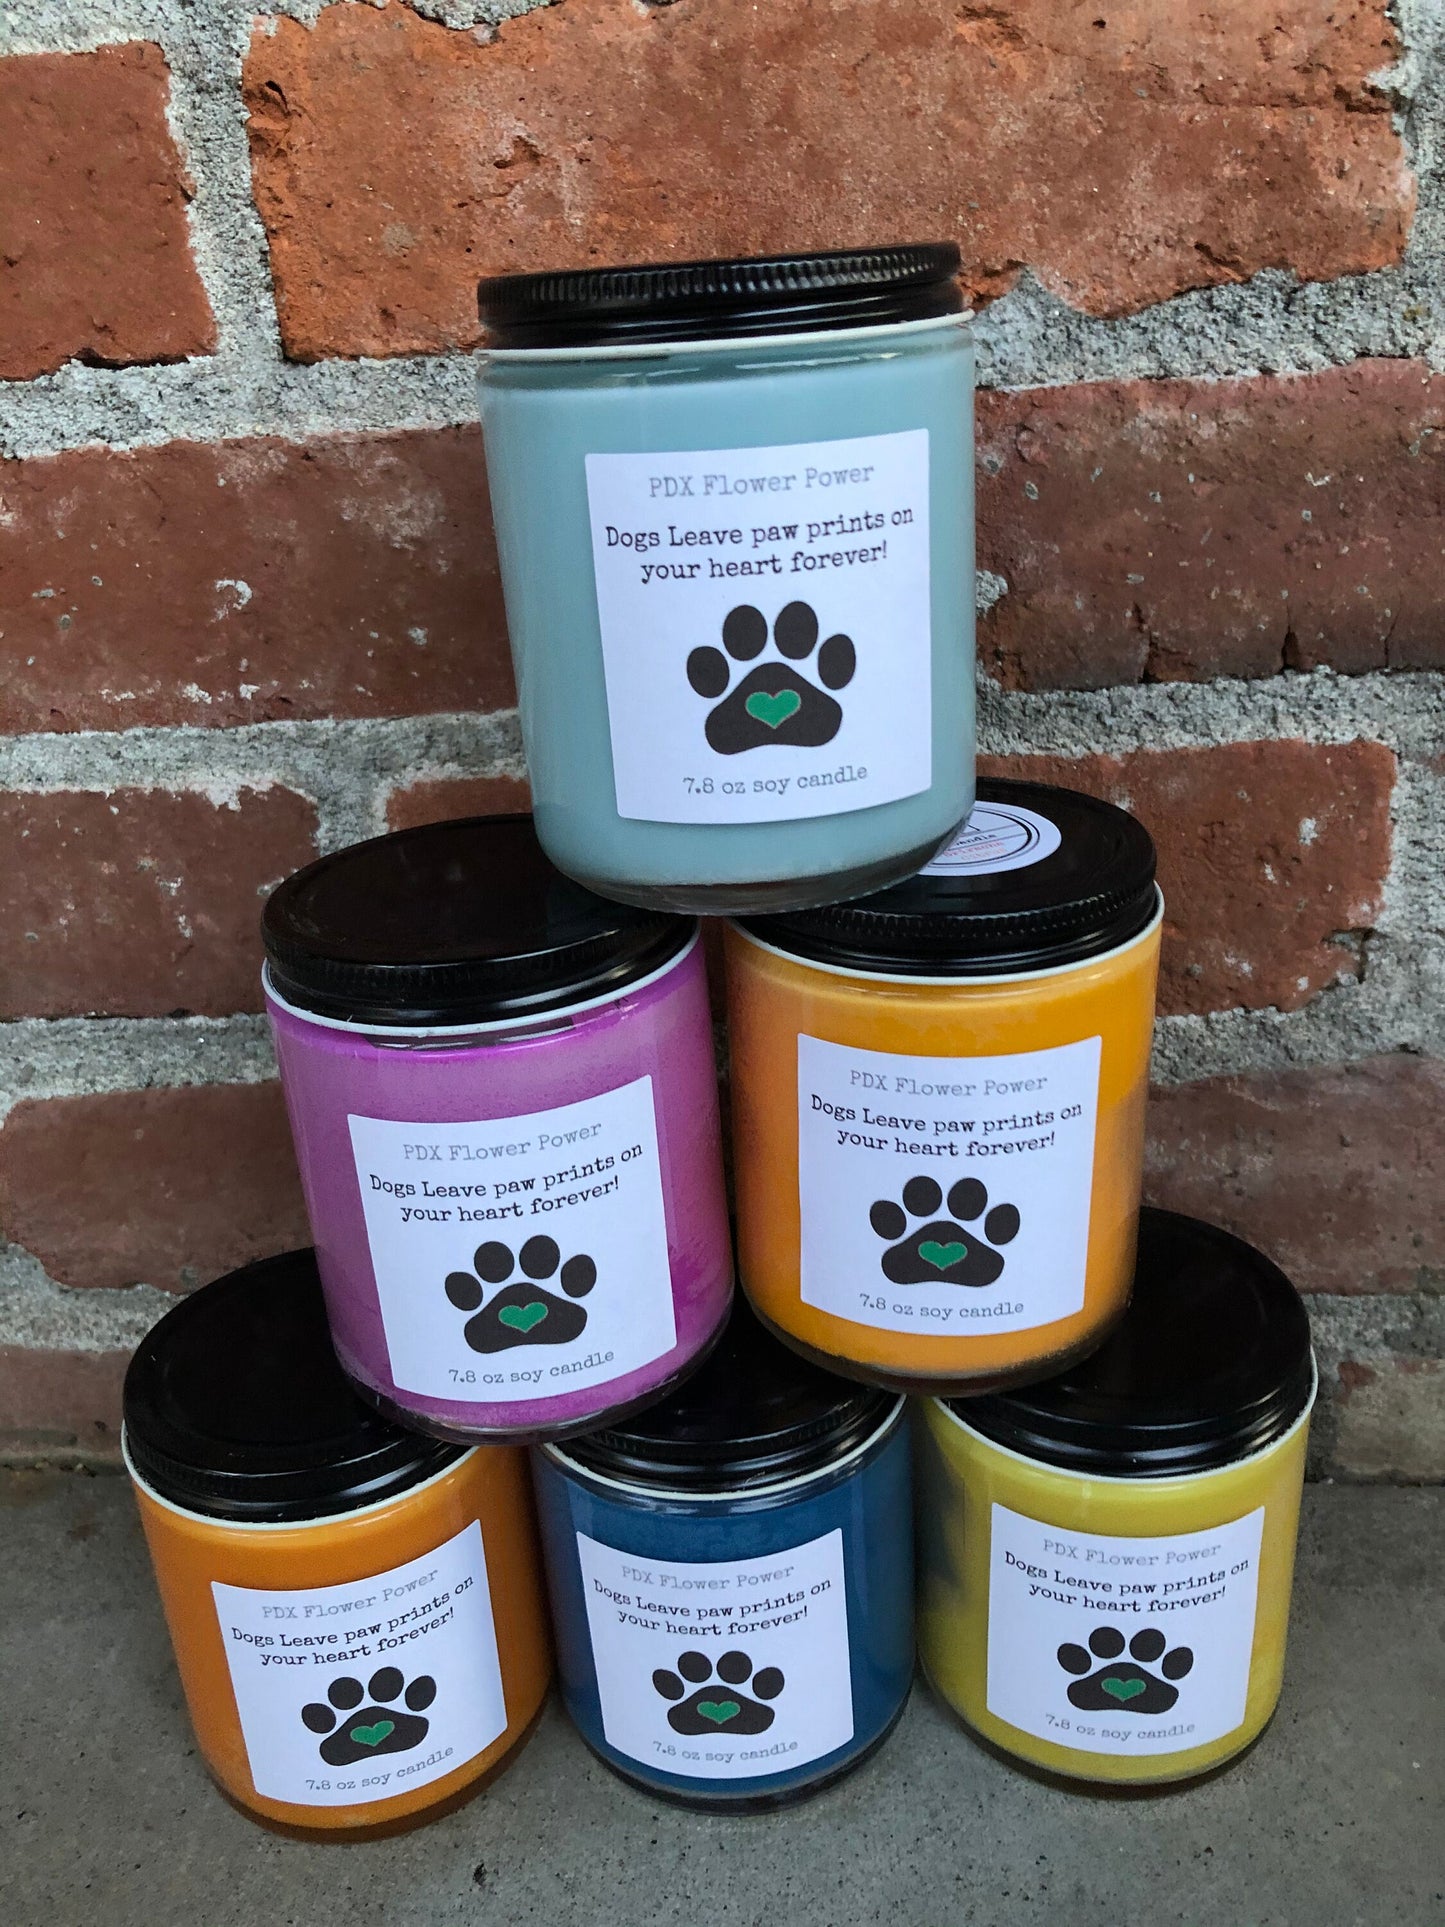 PDX Flower Power " Dogs leave paw prints on your heart forever" soy candle